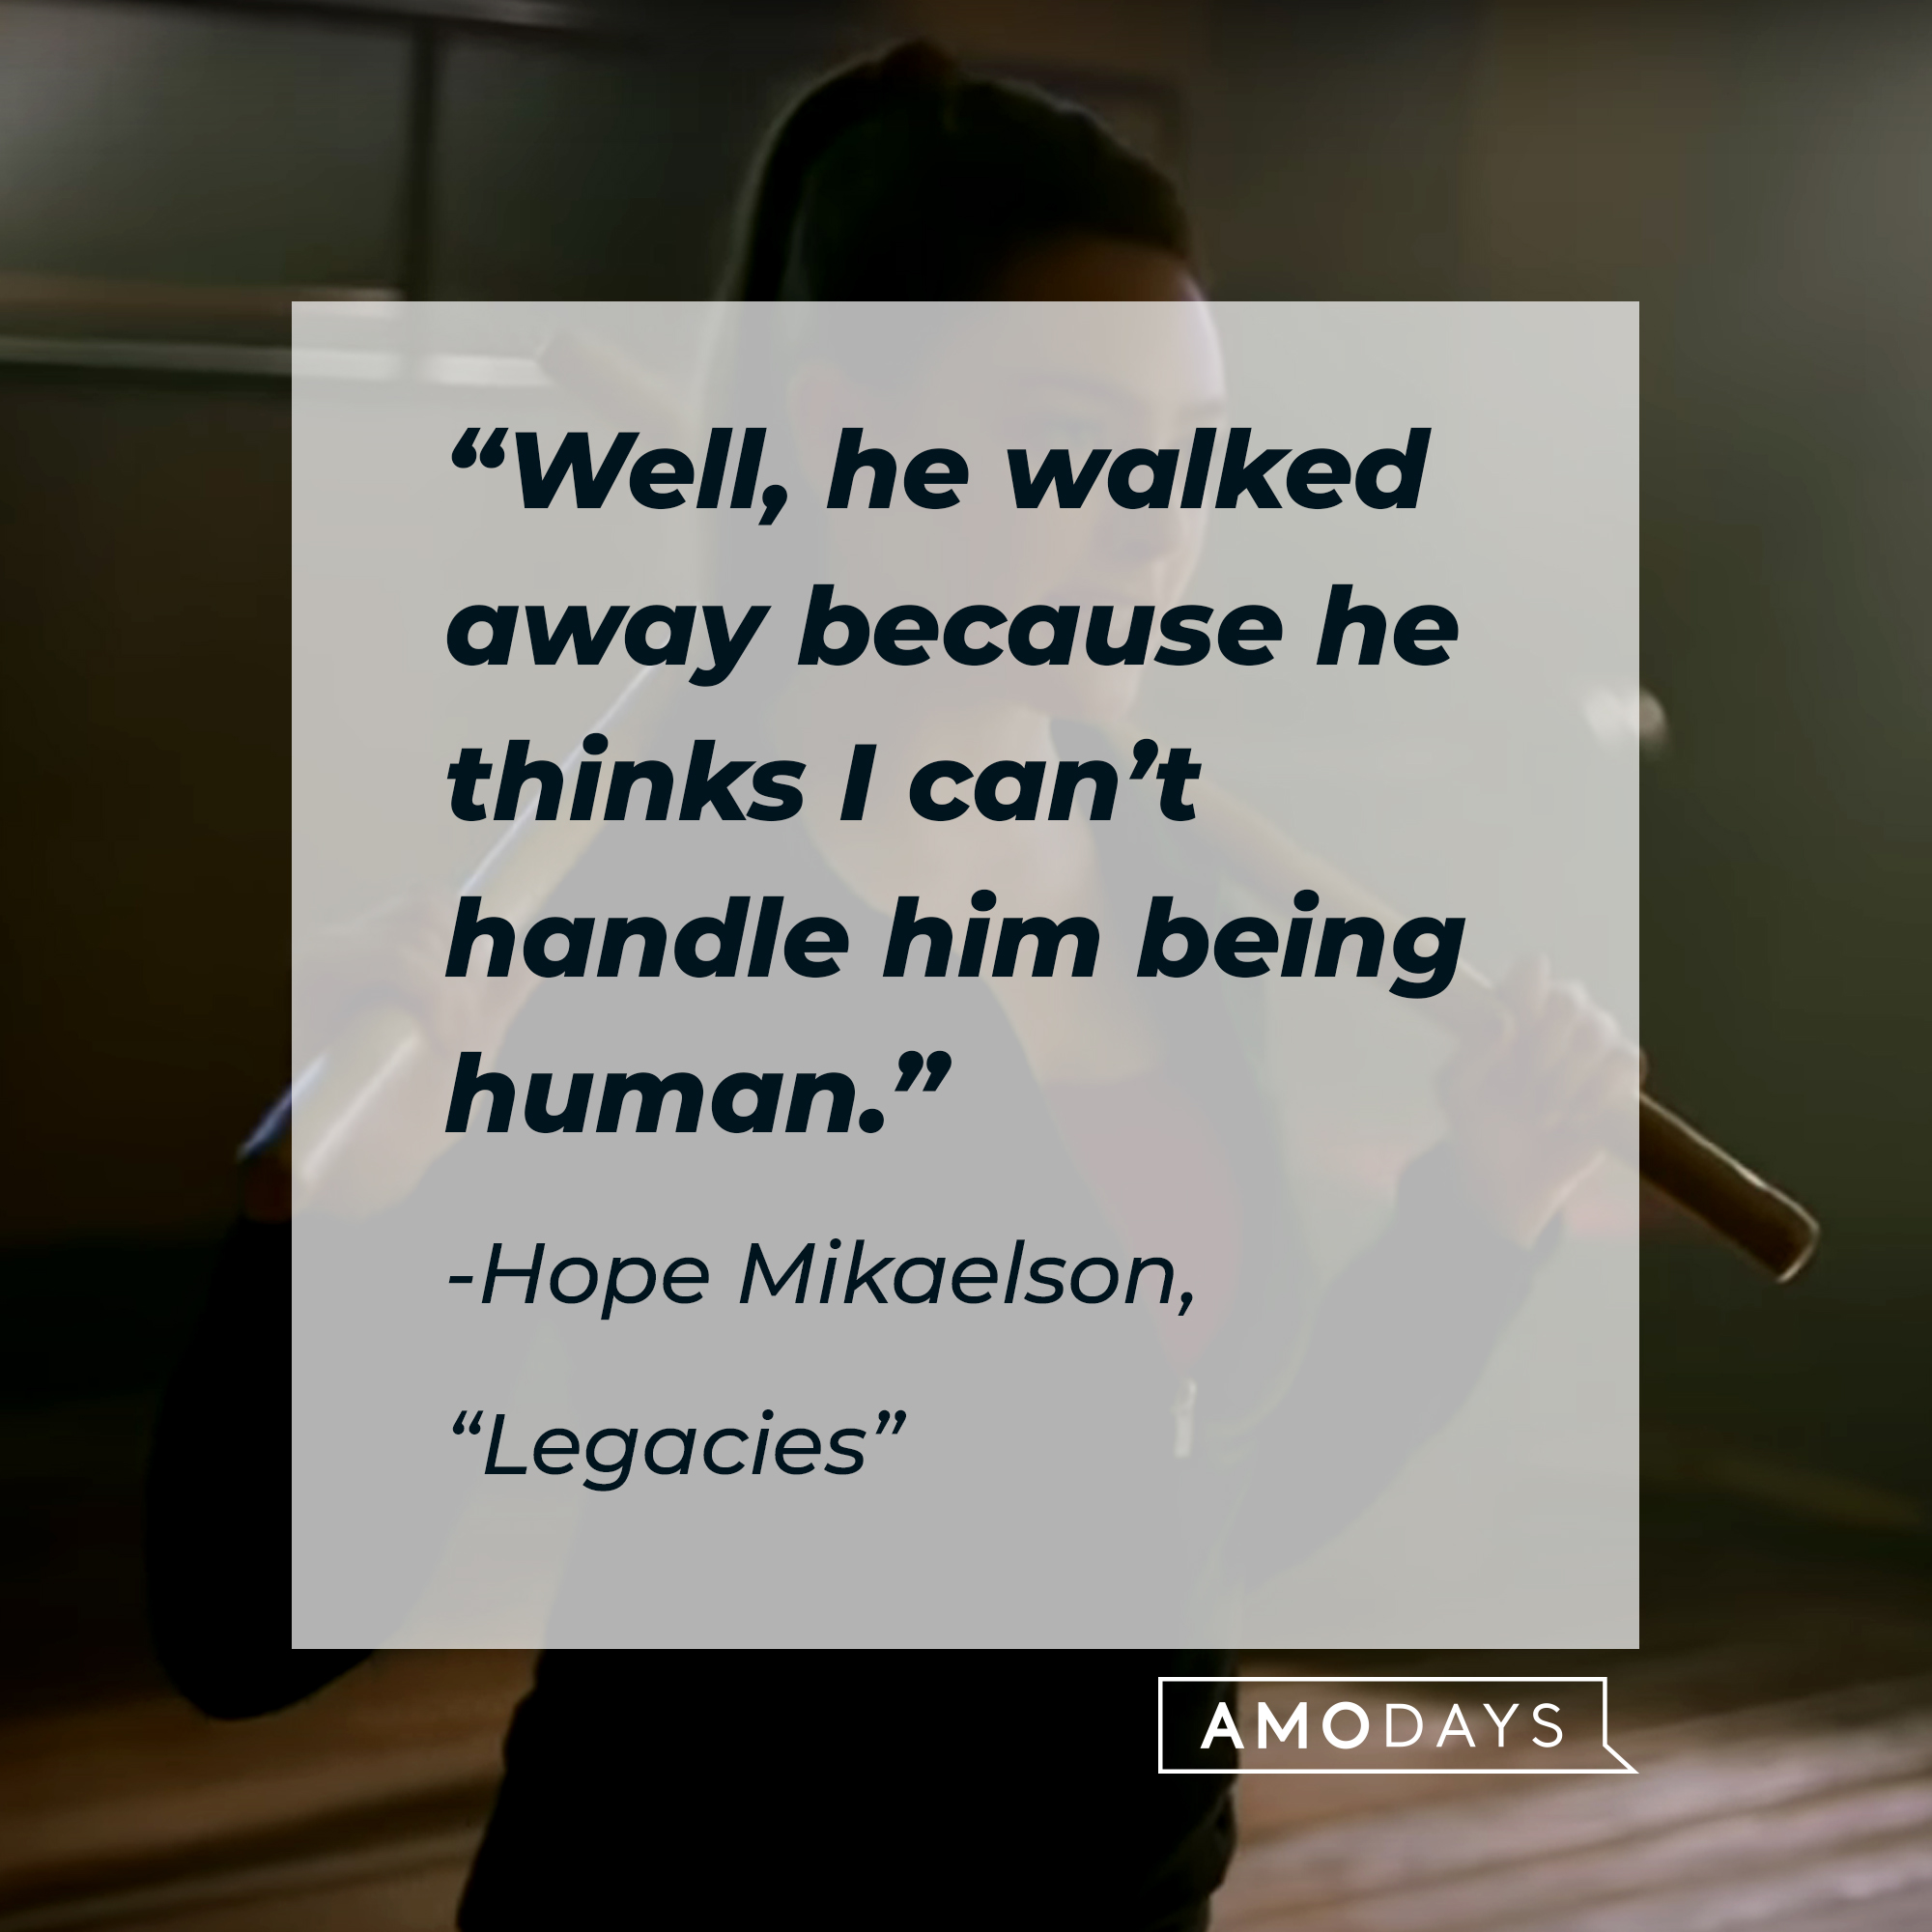 Hope Mikaelson with her quote: “Well, he walked away because he thinks I can’t handle him being human.” | Source: Facebook.com/CWLegacies